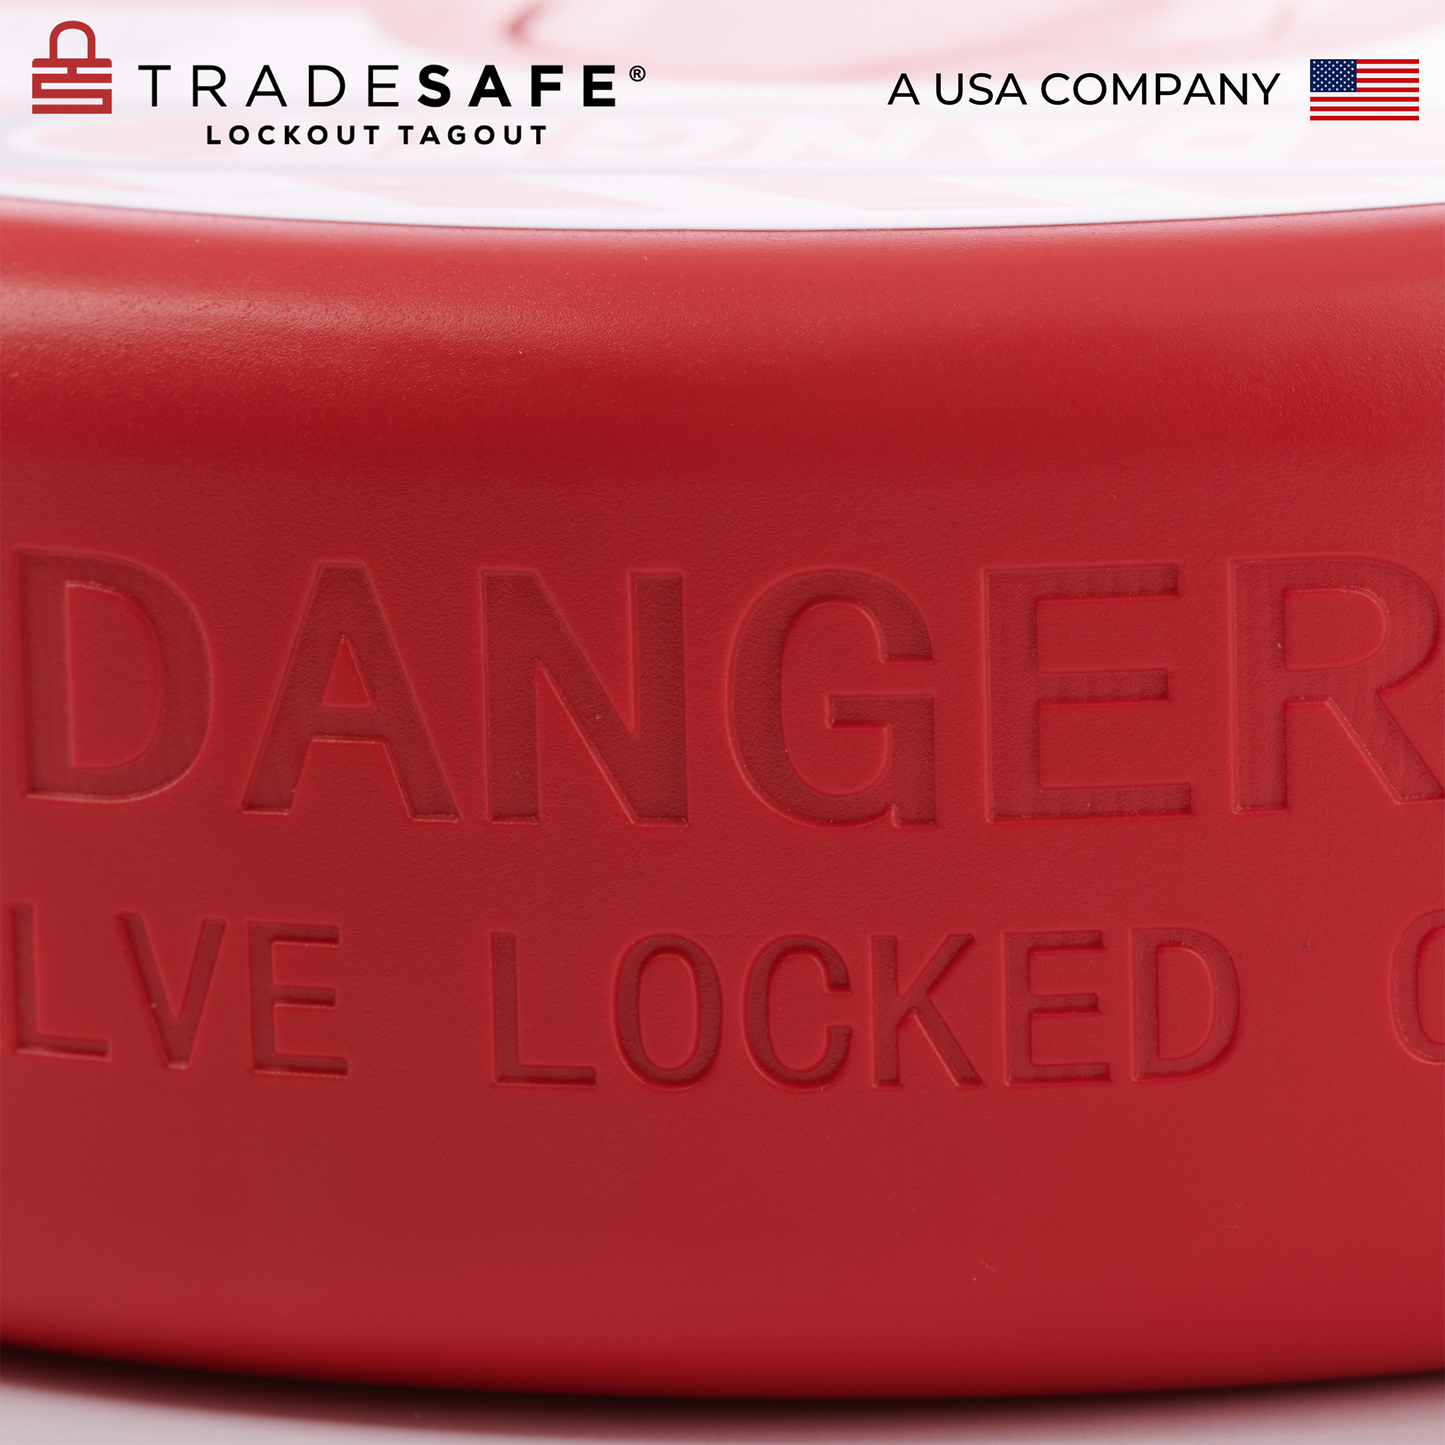 close up view of the warning label engraved on the side of a red gate valve lockout